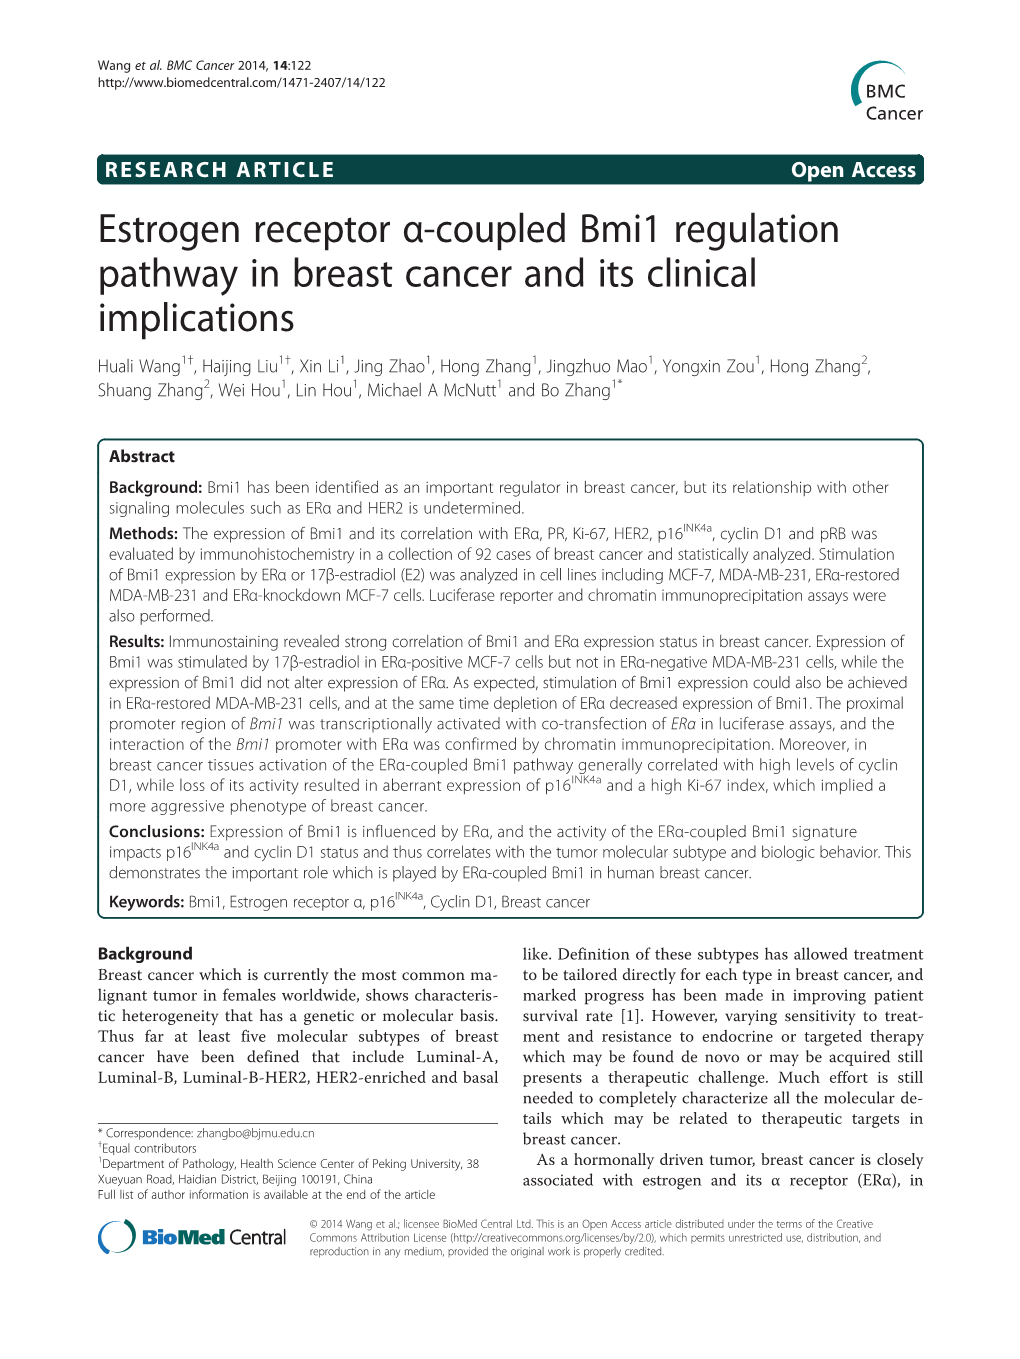 Estrogen Receptor Α-Coupled Bmi1 Regulation Pathway in Breast Cancer and Its Clinical Implications